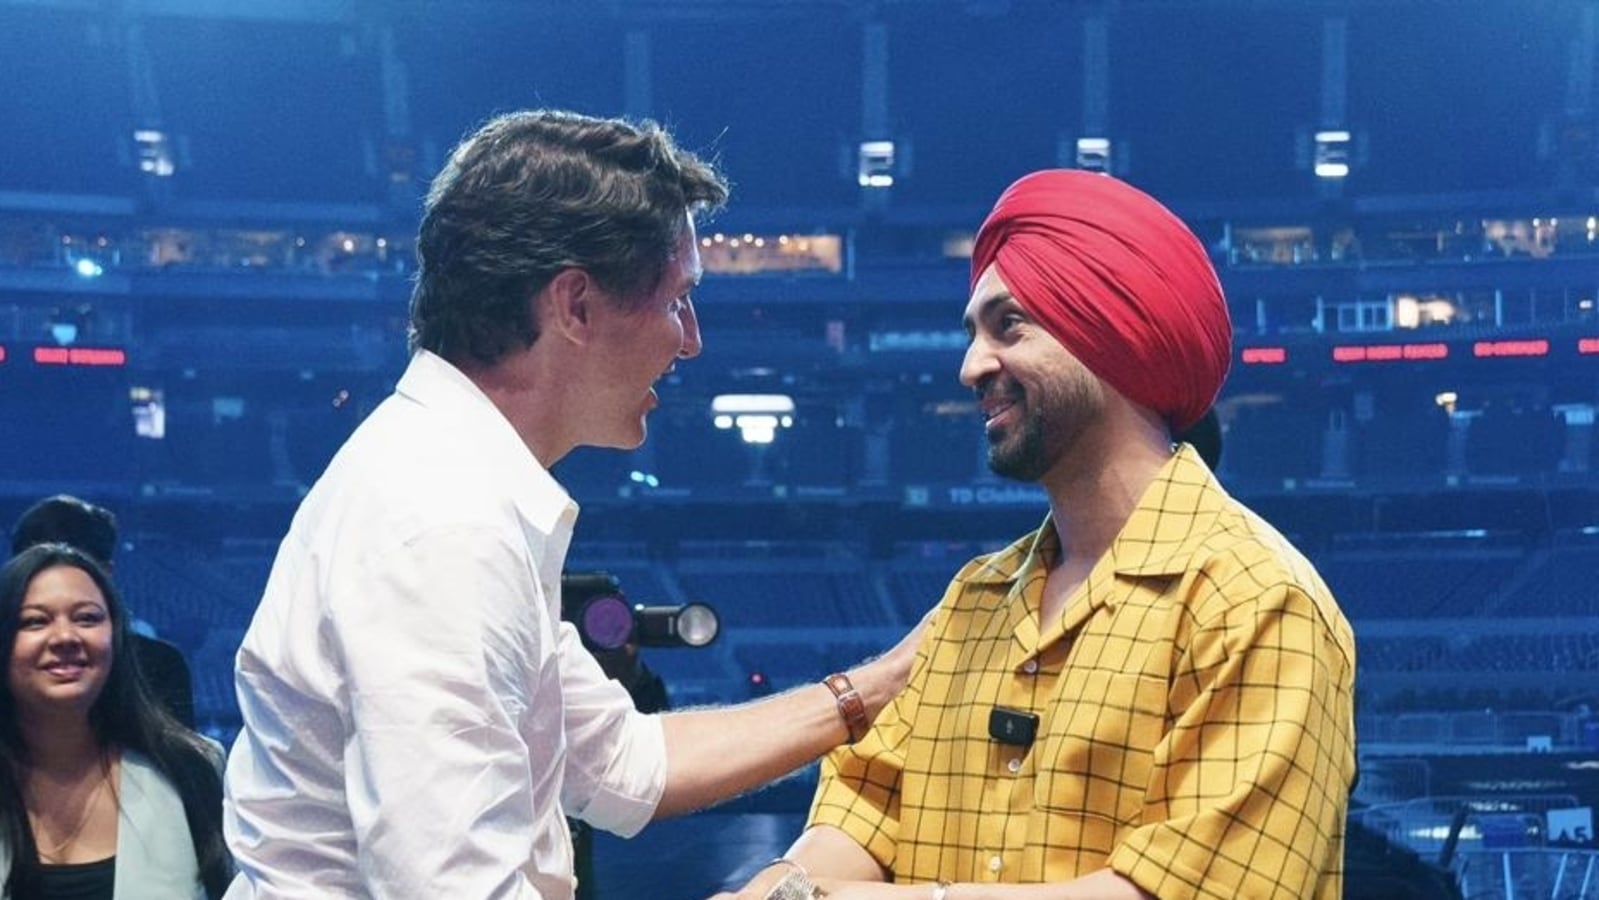 Justin Trudeau calls Diljit Dosanjh ‘guy from Punjab’, BJP leader lectures him: ‘Intentional nonsense’ | Latest news from India